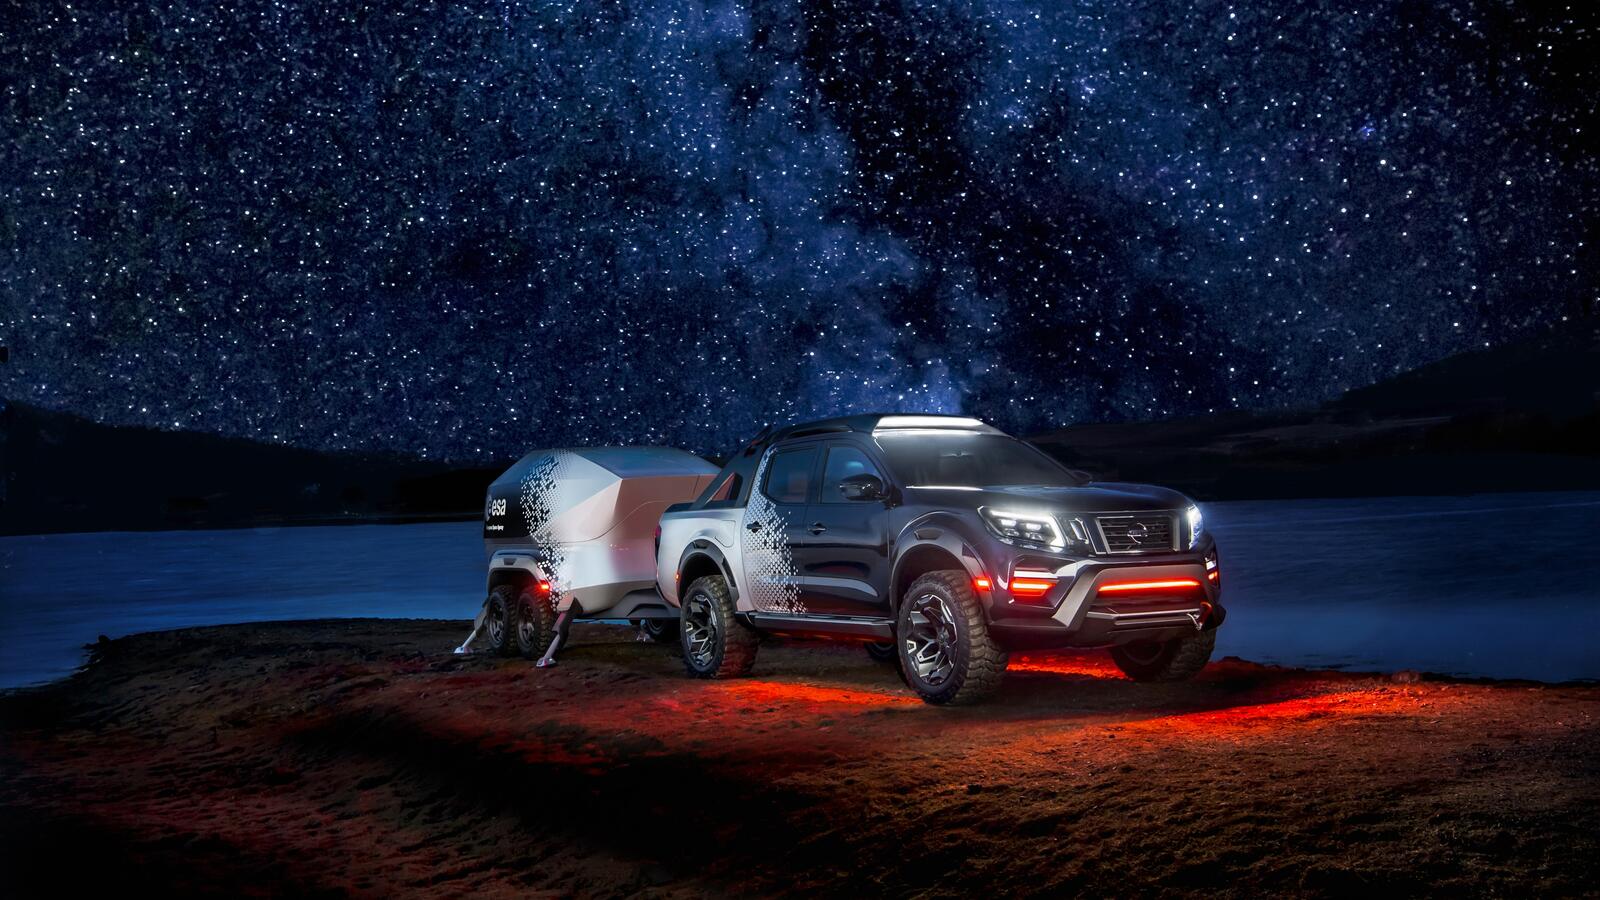 Free photo Nissan Navara with a trailer stands on the edge of a cliff against the night sky with stars in the background